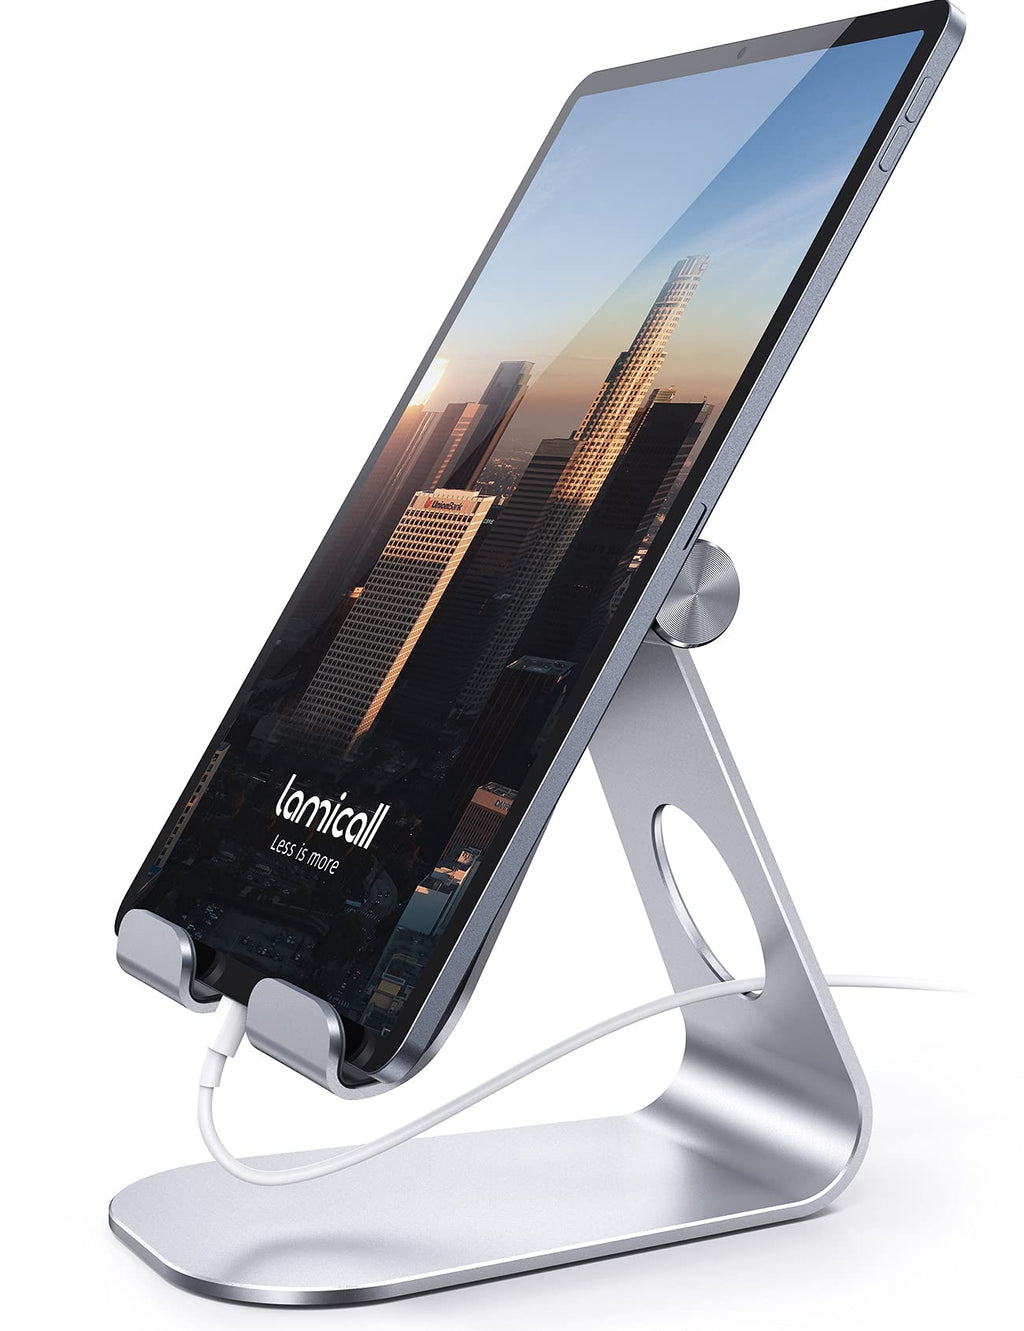  [AUSTRALIA] - Tablet Stand Adjustable, Lamicall Tablet Stand : Desktop Stand Holder Dock Compatible with Tablet Such as iPad Pro 9.7, 10.5, 12.9 Air Mini 4 3 2, Kindle, Nexus, Tab, E-Reader (4-13") - Silver